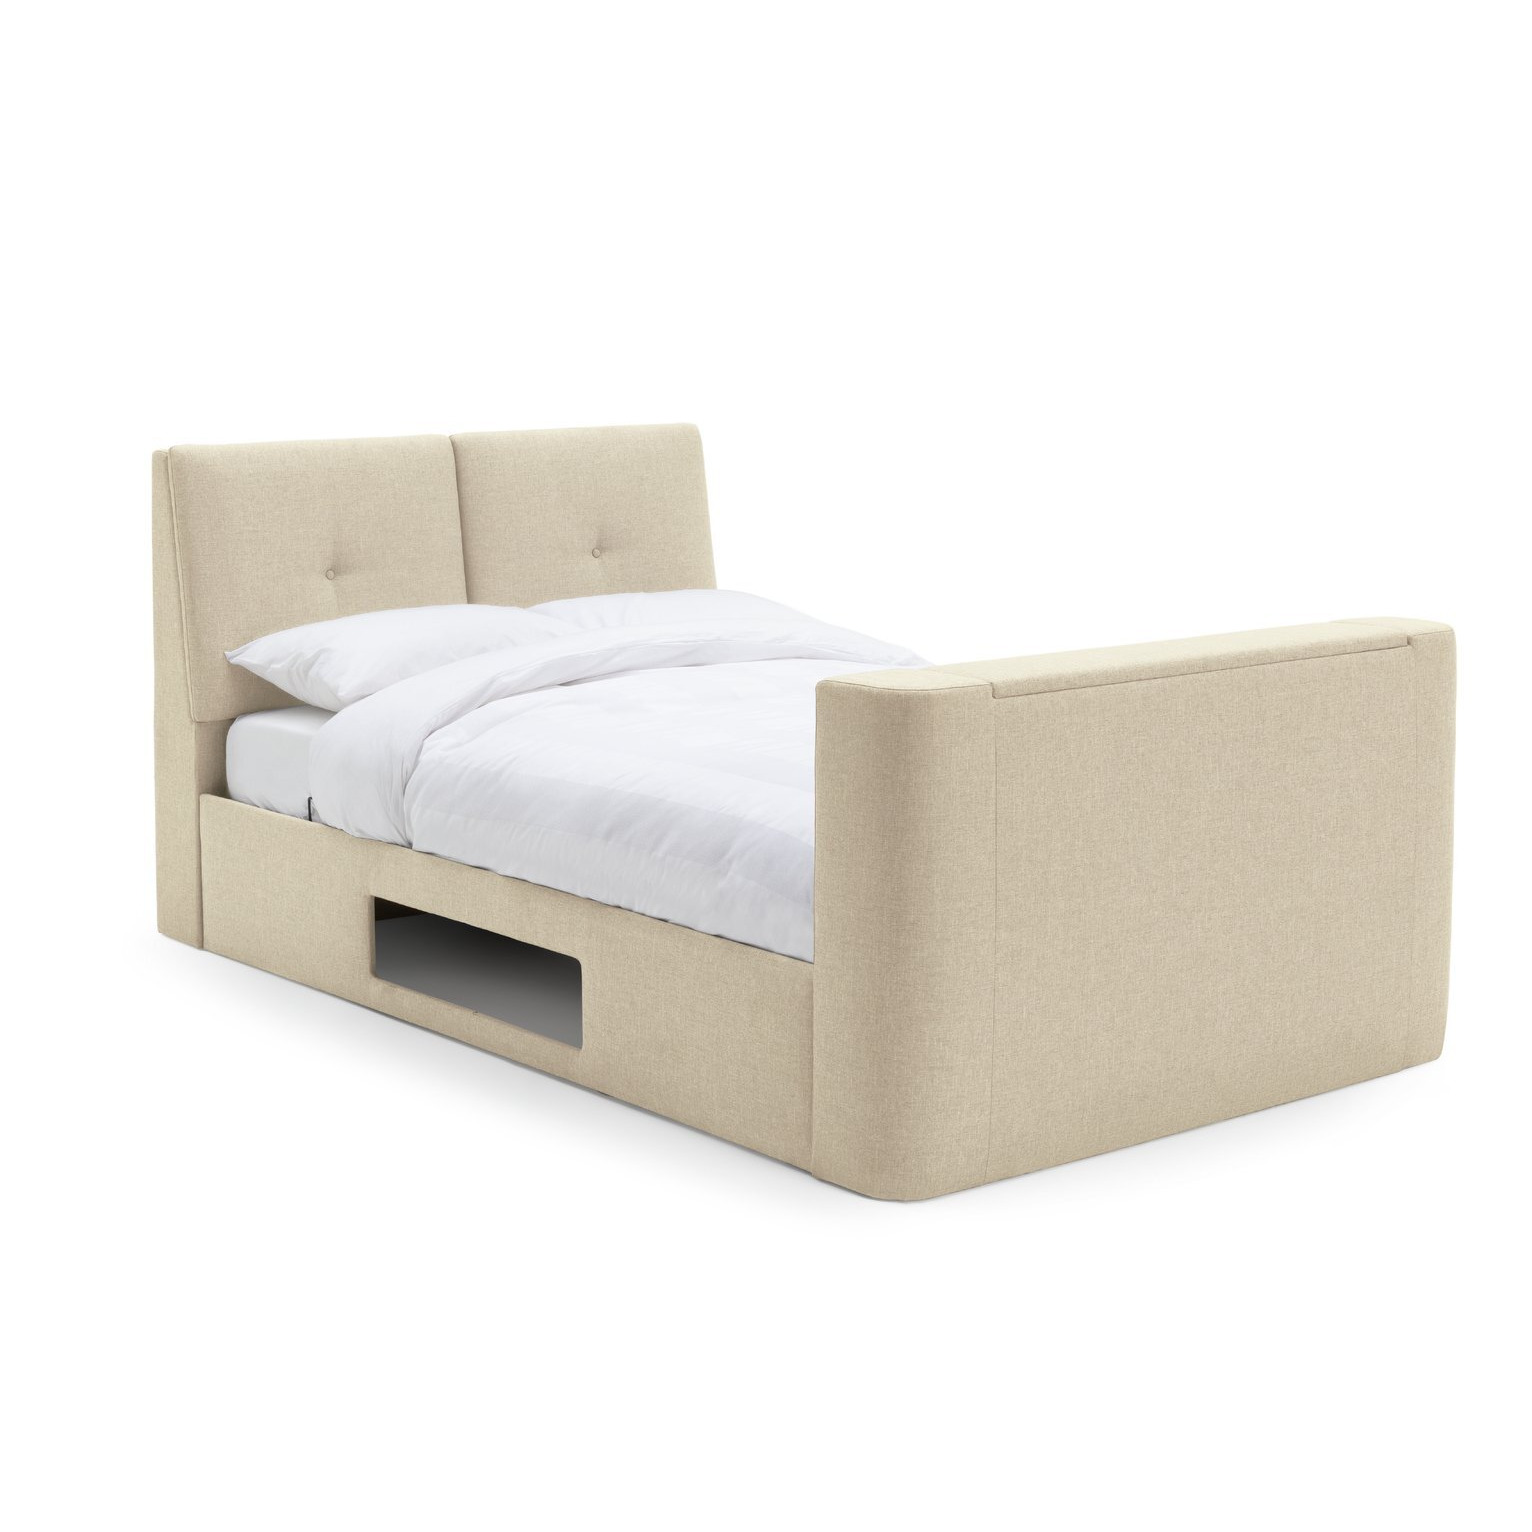 Argos Home Jakob Double TV Ottoman Fabric Bed Frame- Natural - image 1